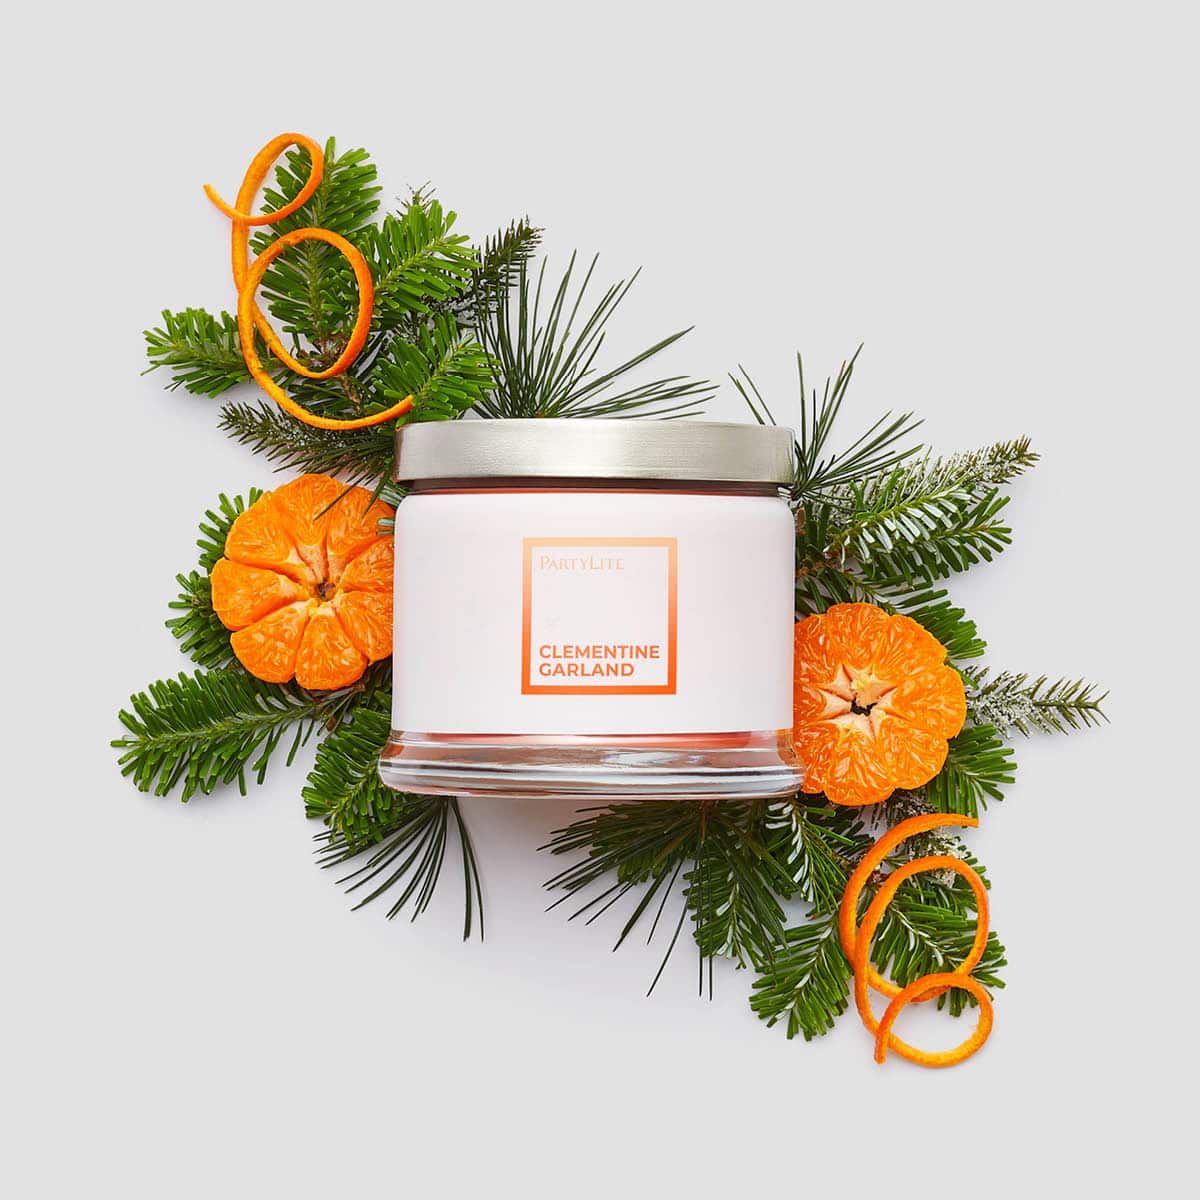 Clementine Garland 3-Wick Jar Candle